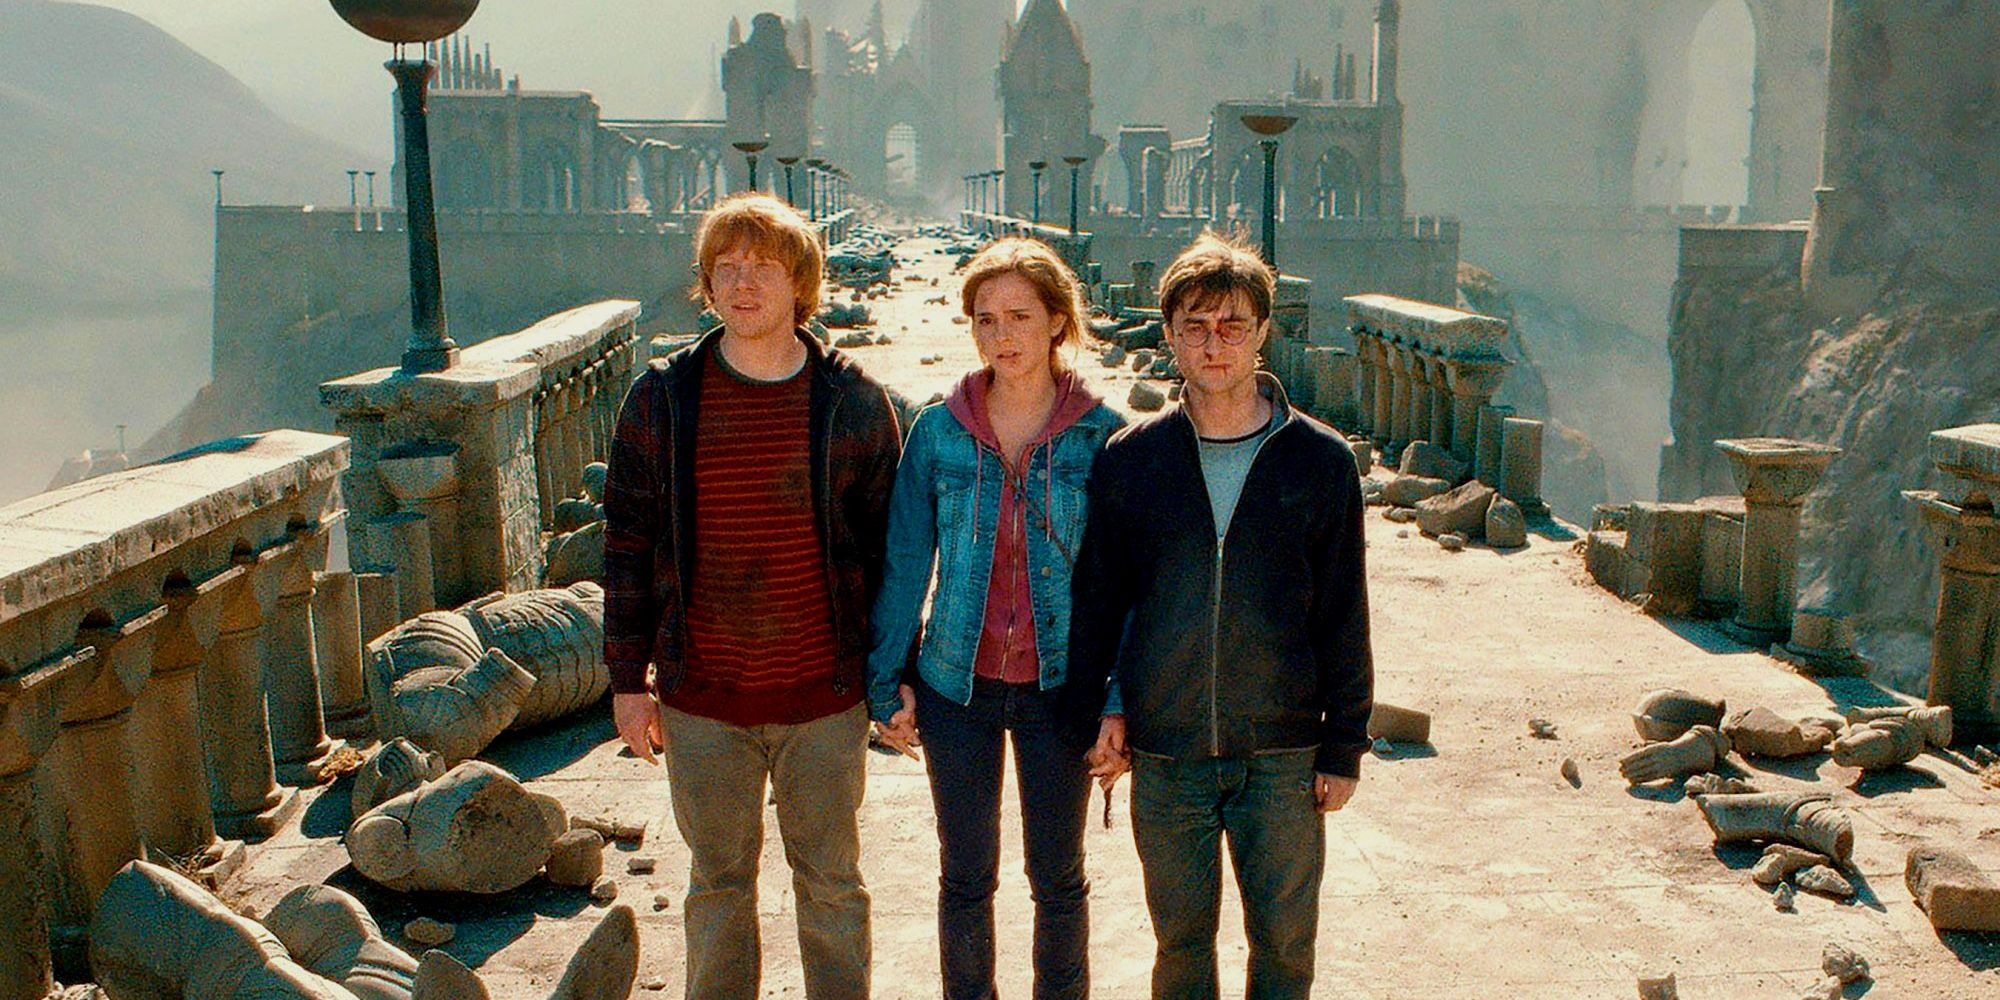 Harry and Ron standing in the destruction of Hogwarts castle in Harry Potter. 